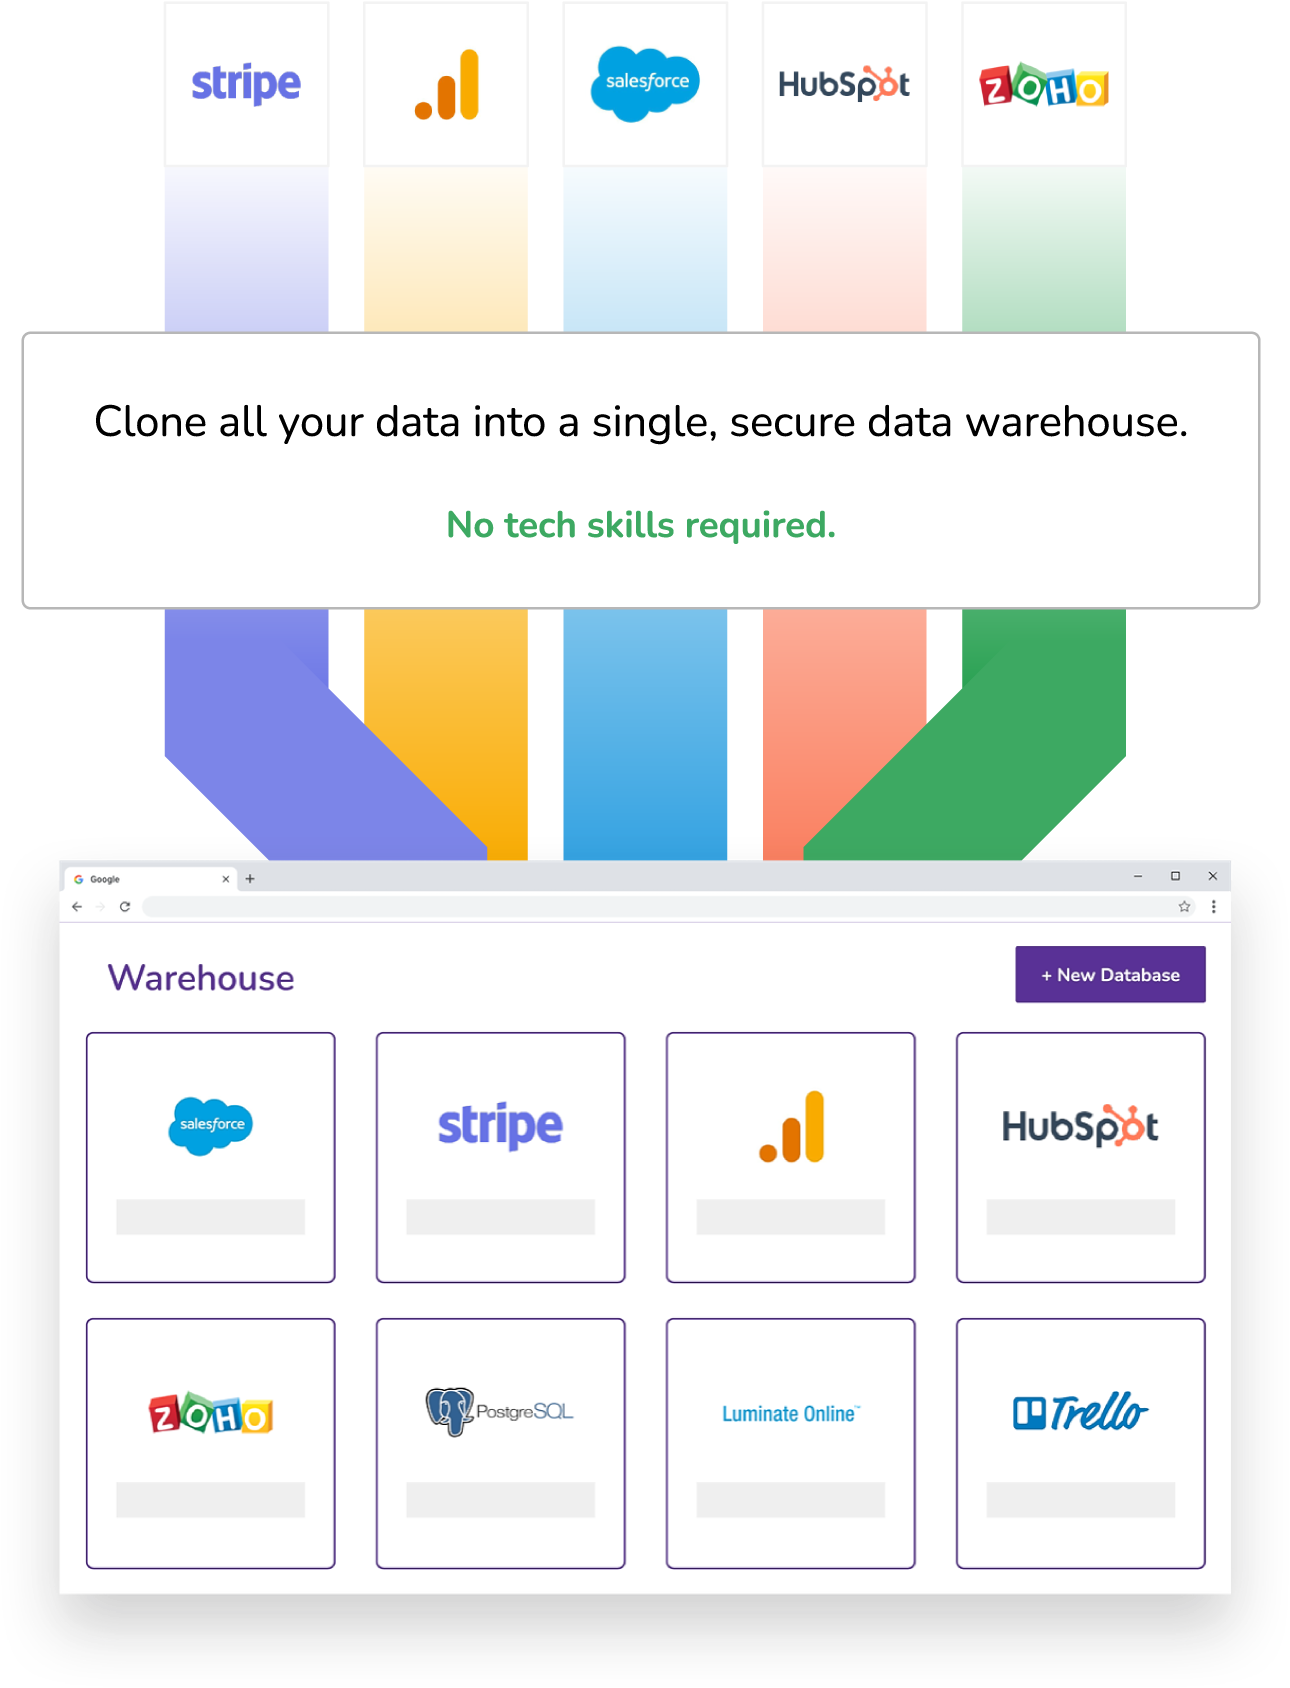 Clone all your data into a single, secure data warehouse